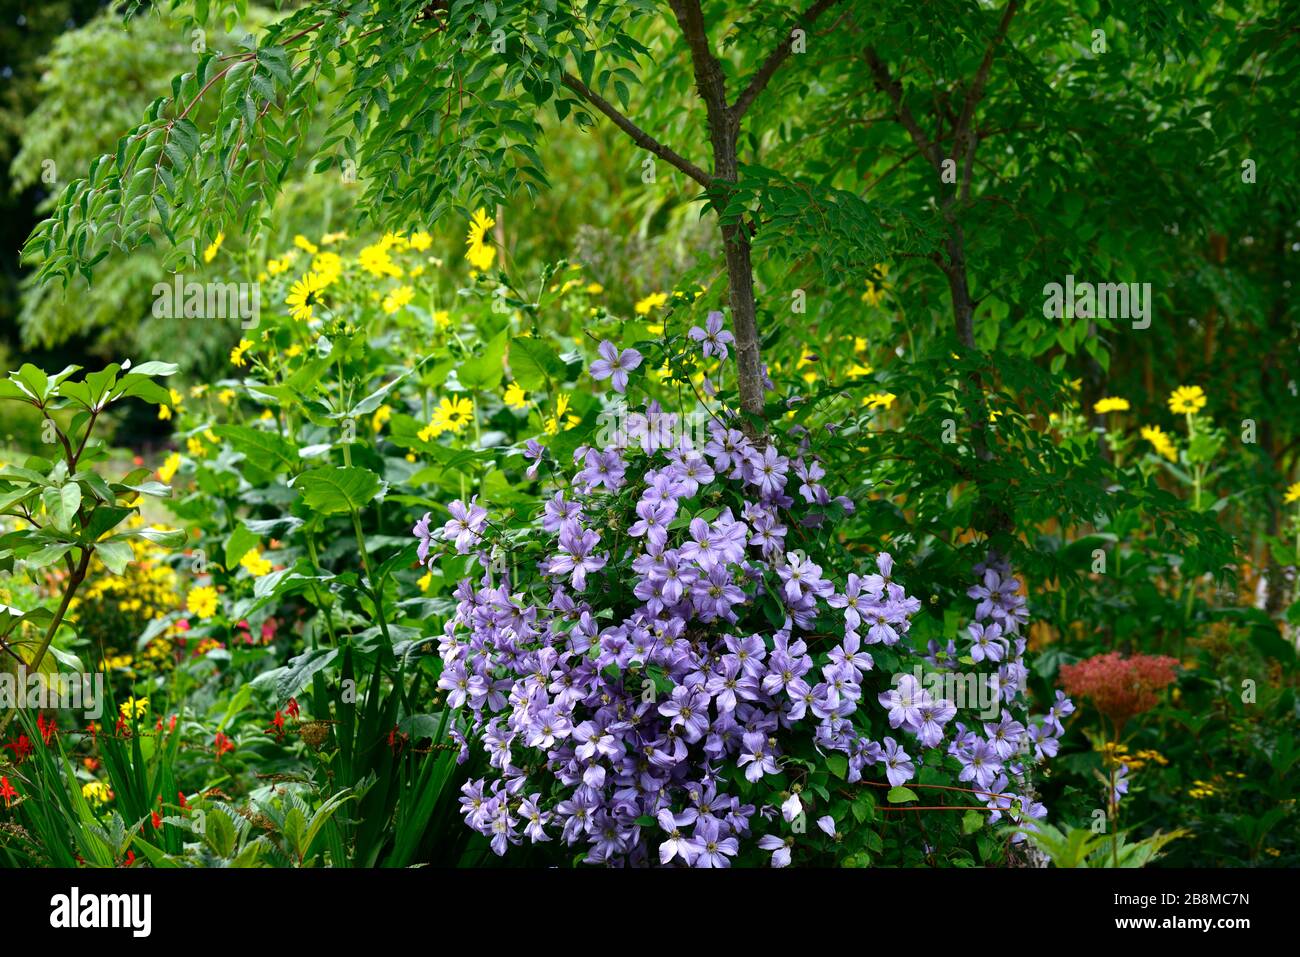 Clematis viticella Blue Angel,growing on tree trunk,aralia,mixed bed.mixed border,flowering,blue flowers,garden,gardens,RM Floral Stock Photo